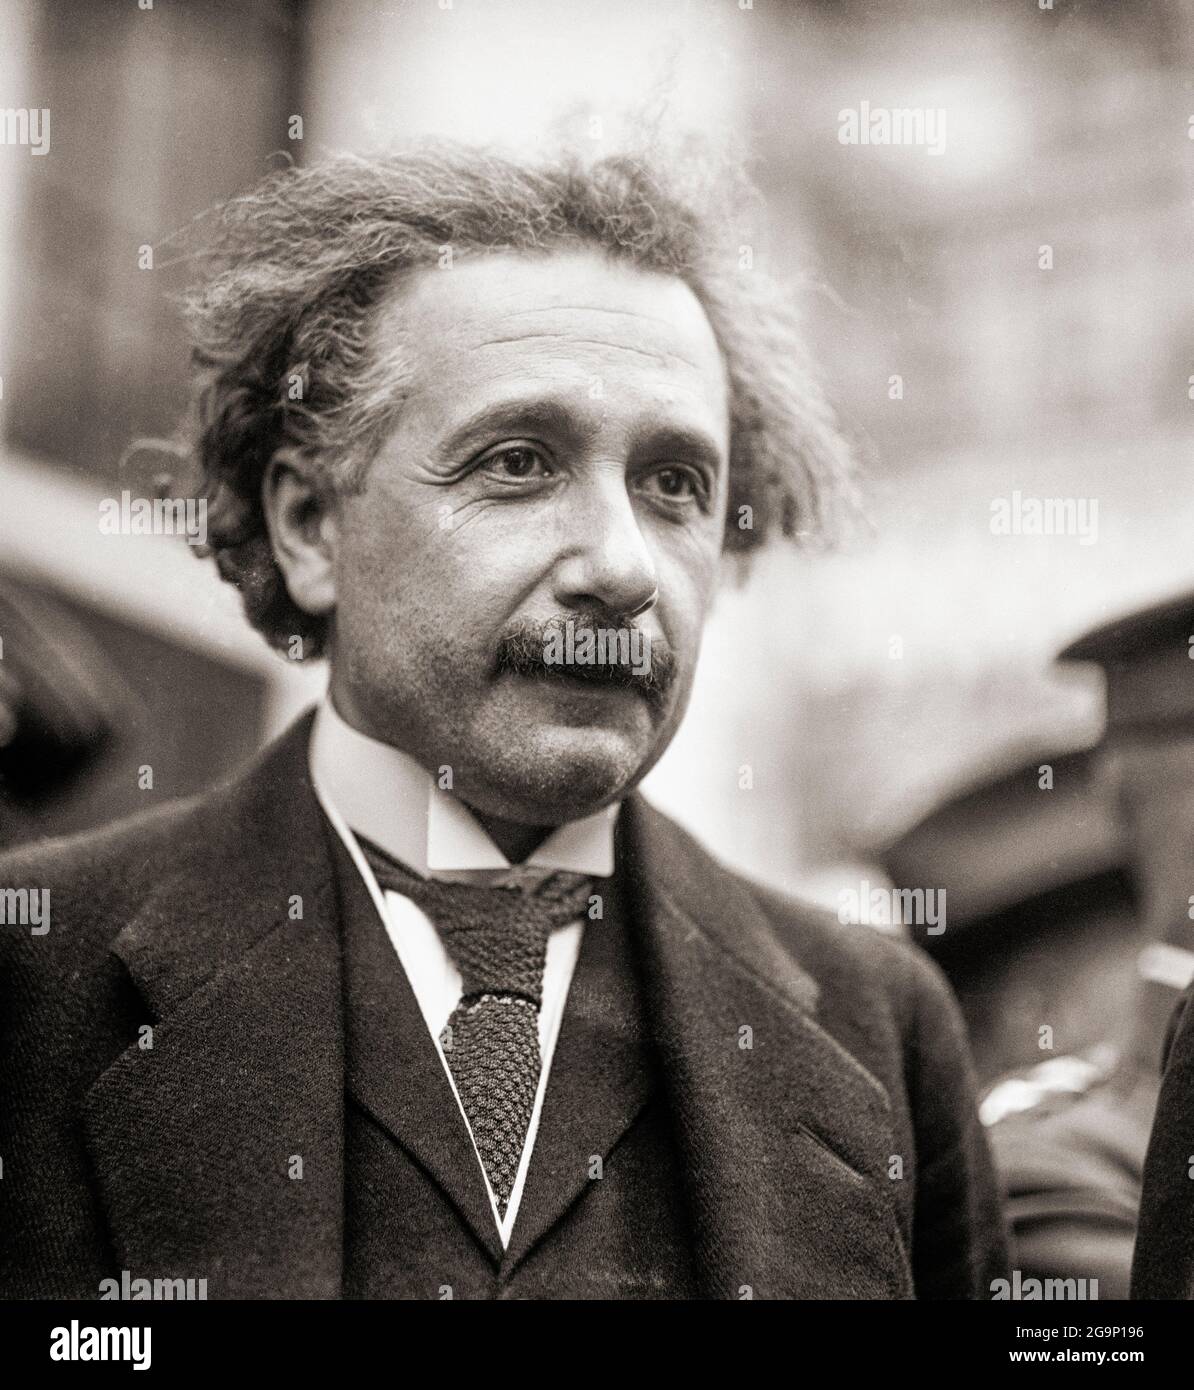 Albert Einstein, 1879 - 1955.  German born theoretical physicist.  Amongst many accomplishments he posited theories of General Relativity, Special Relativity, and mass–energy equivalence. Stock Photo